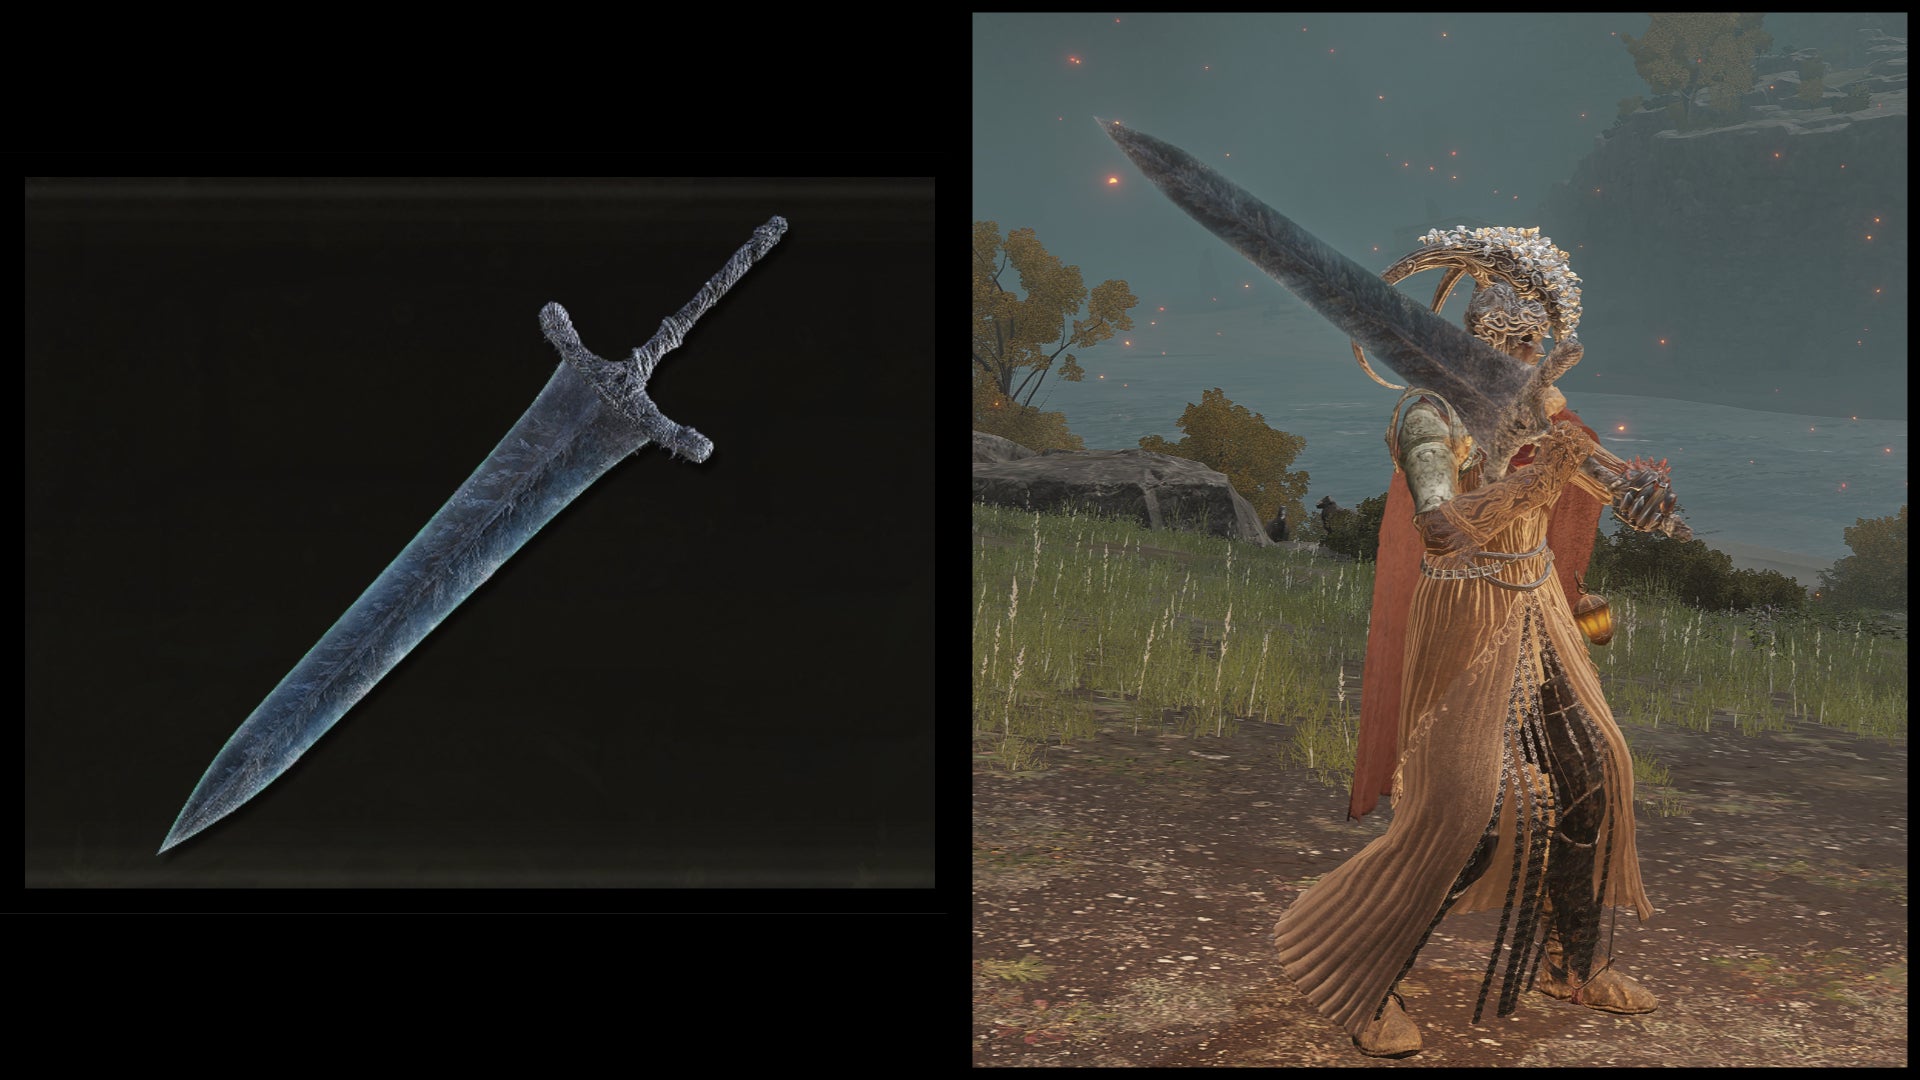 Left: an illustration of the Dark Moon Greatsword from Elden Ring. Right: the player character holding the same weapon against a Limgrave background.